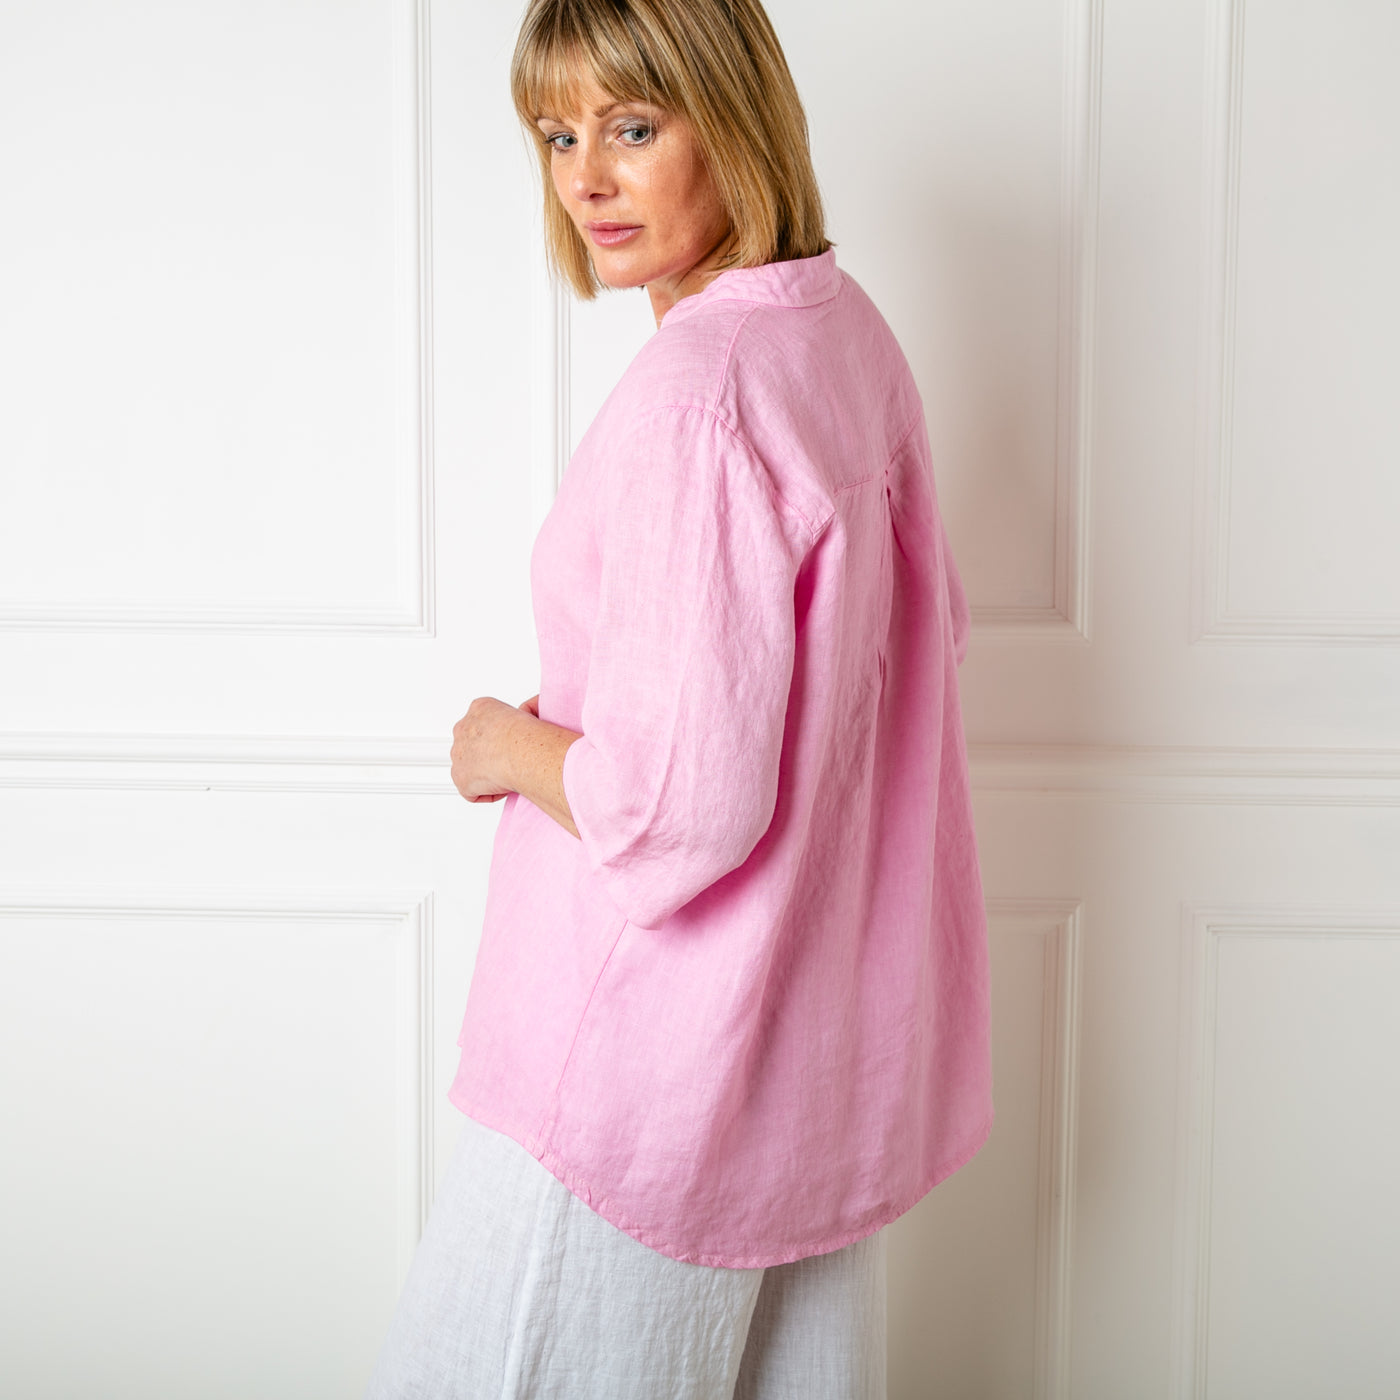 The Linen Tunic Top in pink which is perfect for a relaxed summer look 